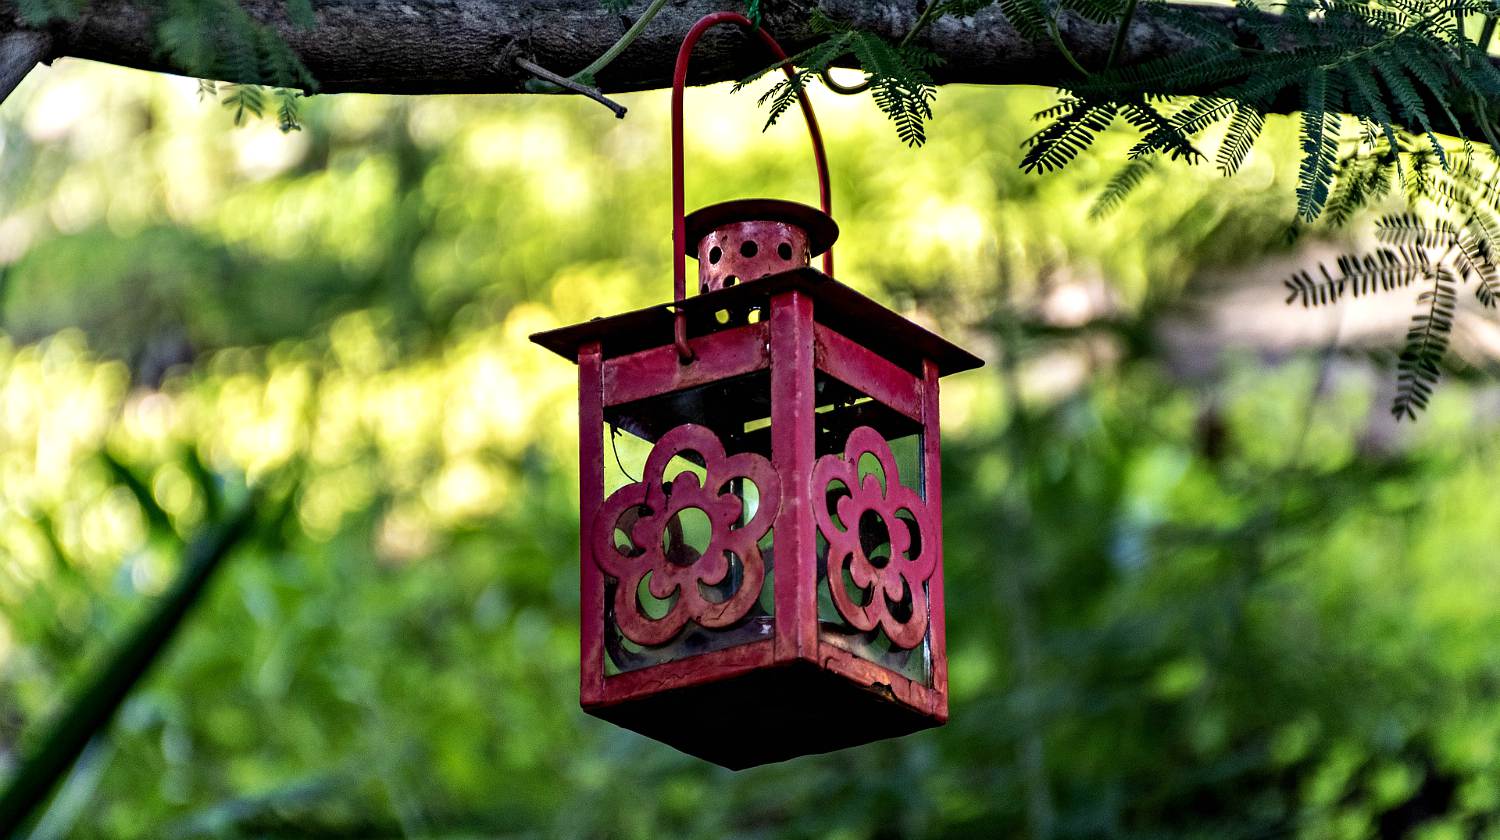 Feature | Lantern hanging in the tree | How To Make An Improvised Camping Lantern